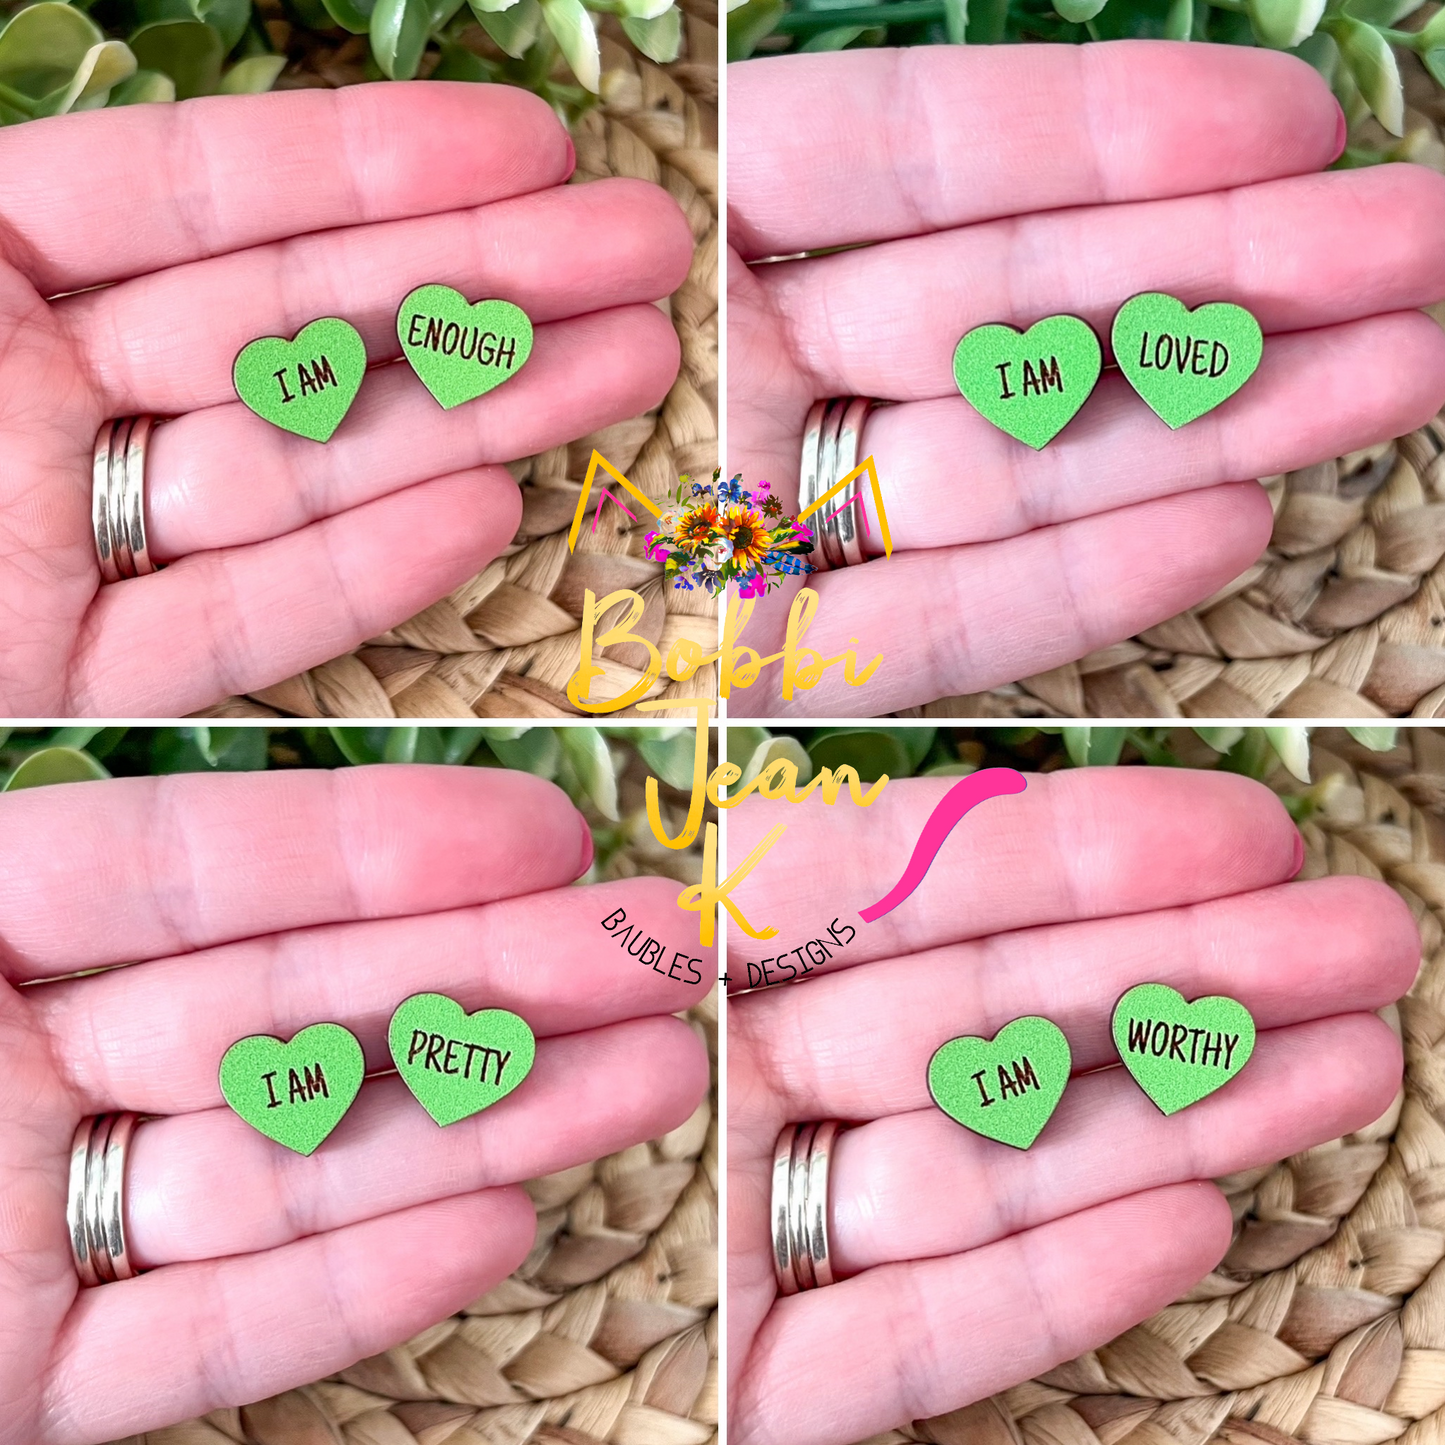 Green Wood Affirmation Heart Studs: 4 Pairs in One Set